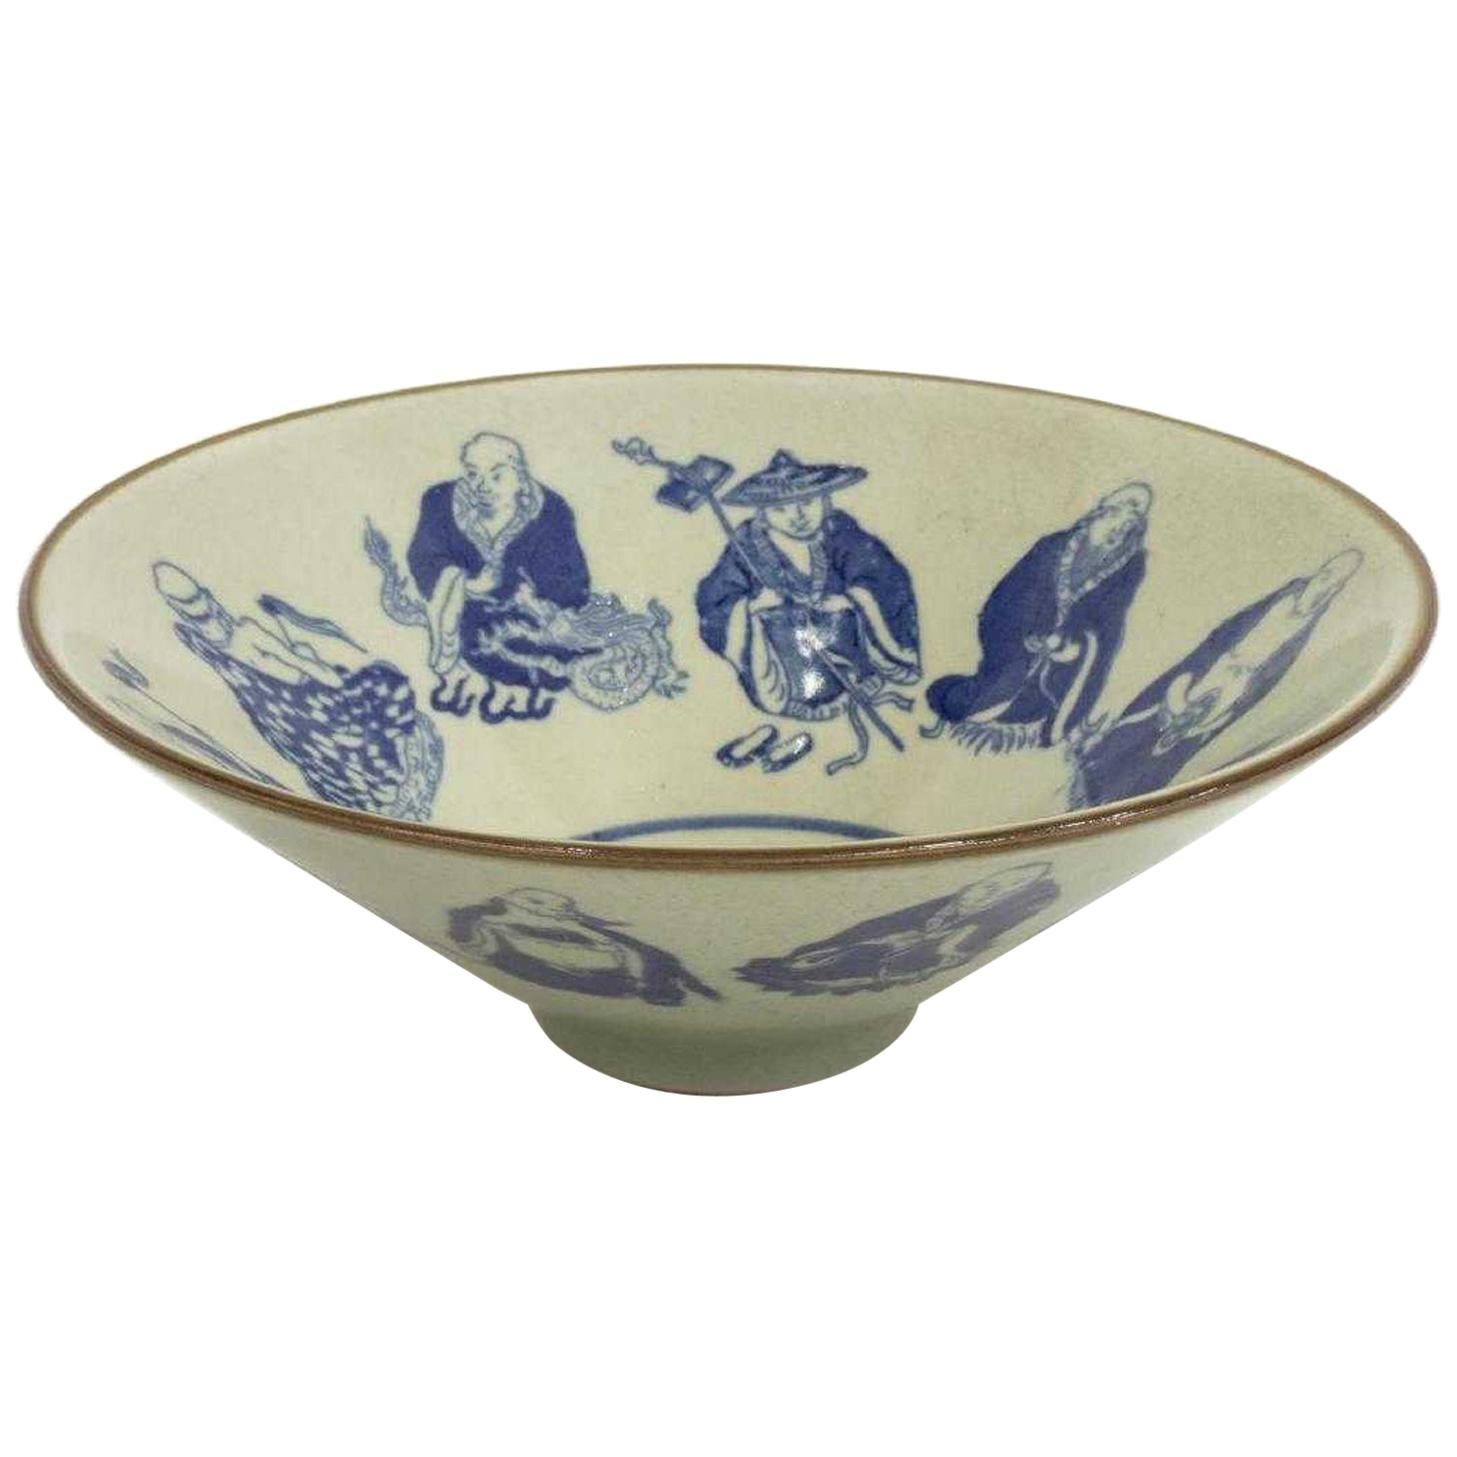 Chinese Celadon and Blue Porcelain Bowl